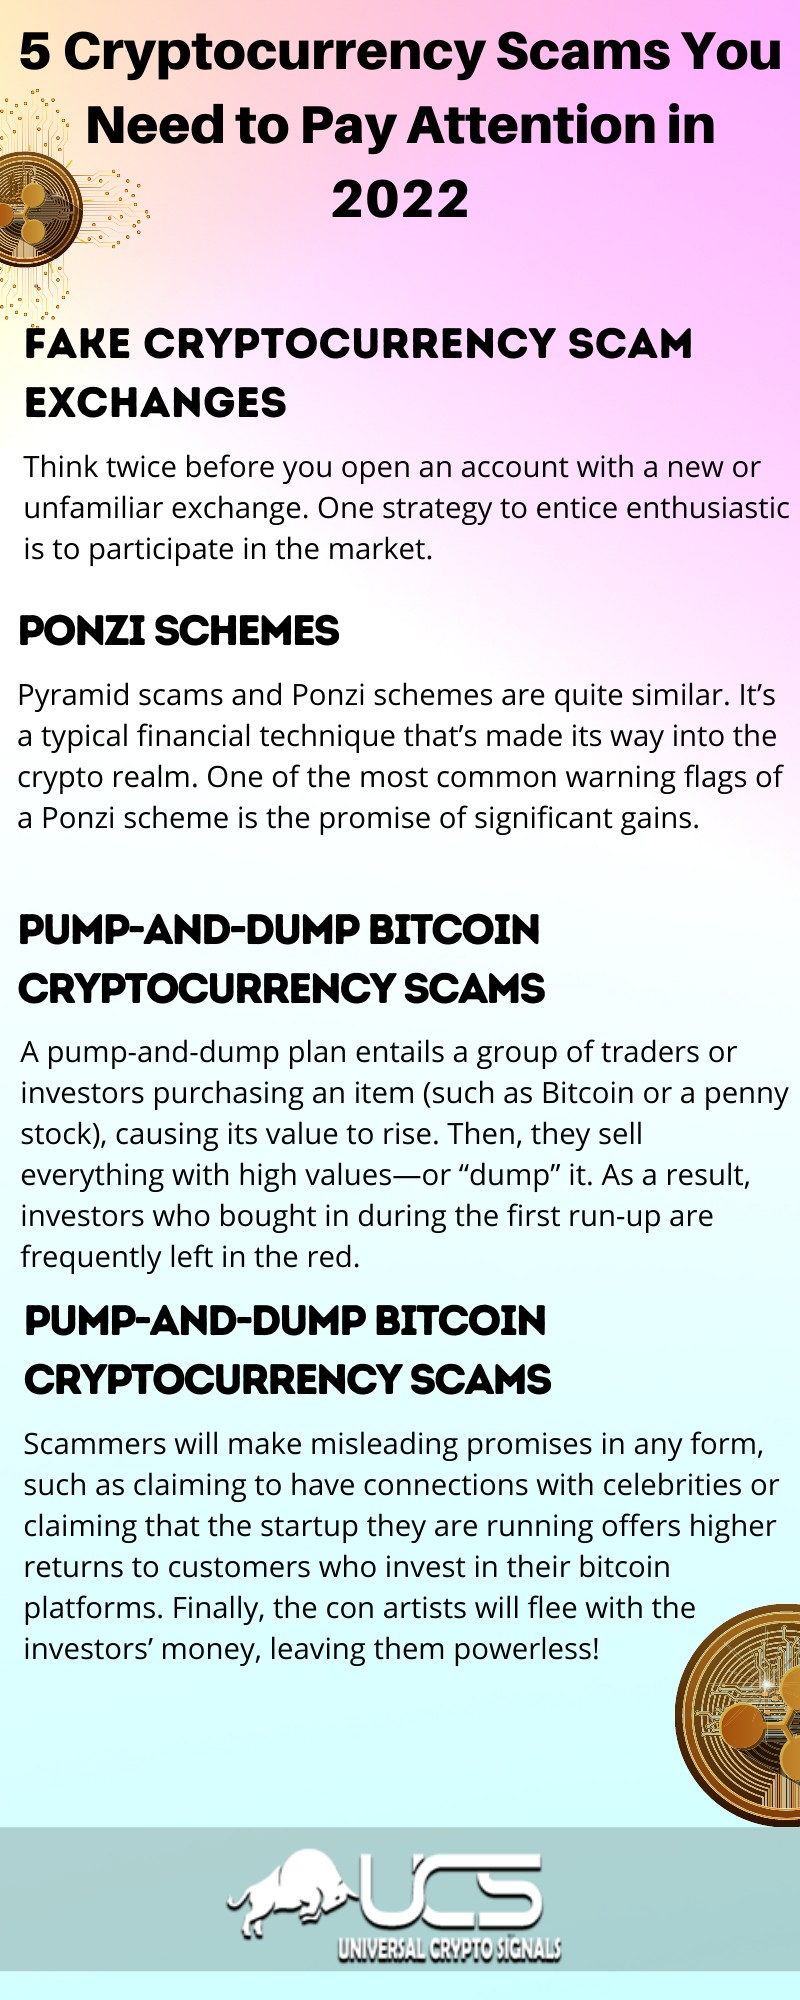 5 Cryptocurrency Scams You Need to Pay Attention in 2022